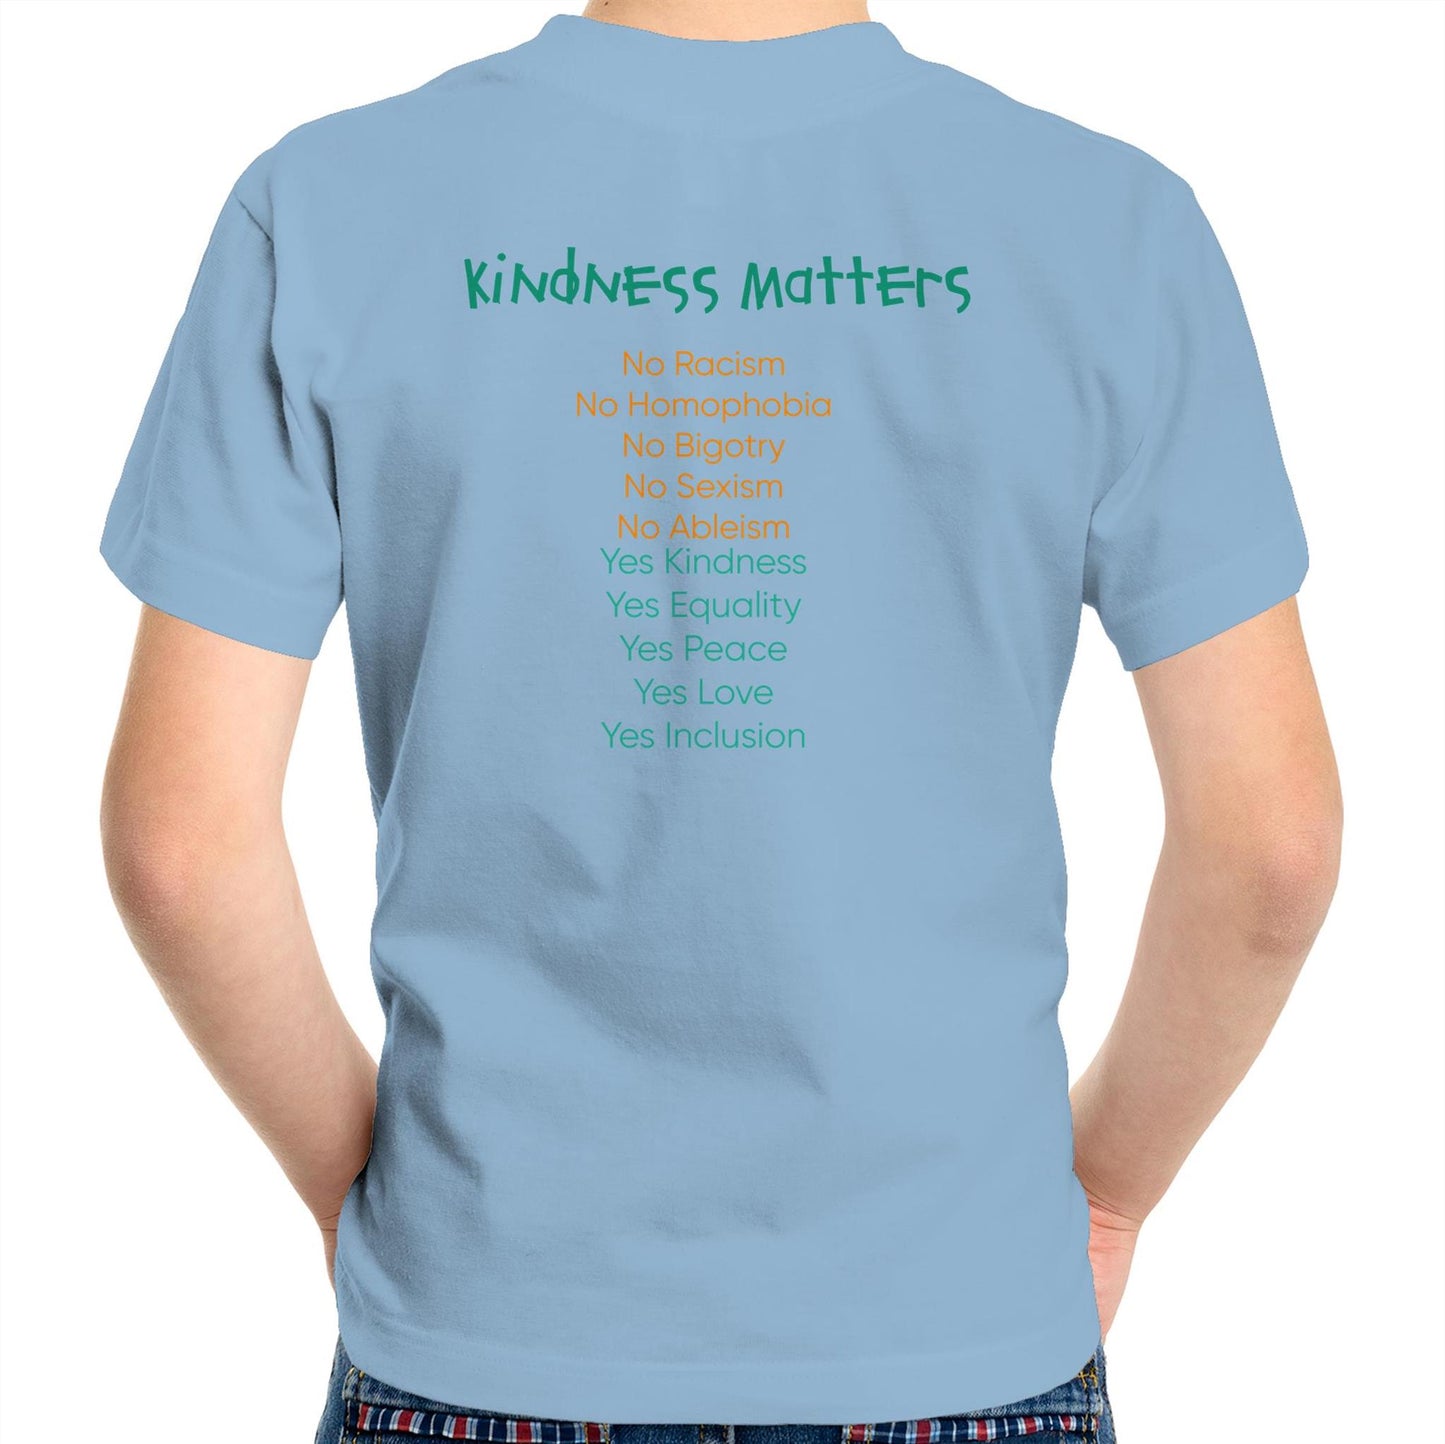 Kindness Matters, Kids Youth Crew T-Shirt by D.B. - Front and Back printing